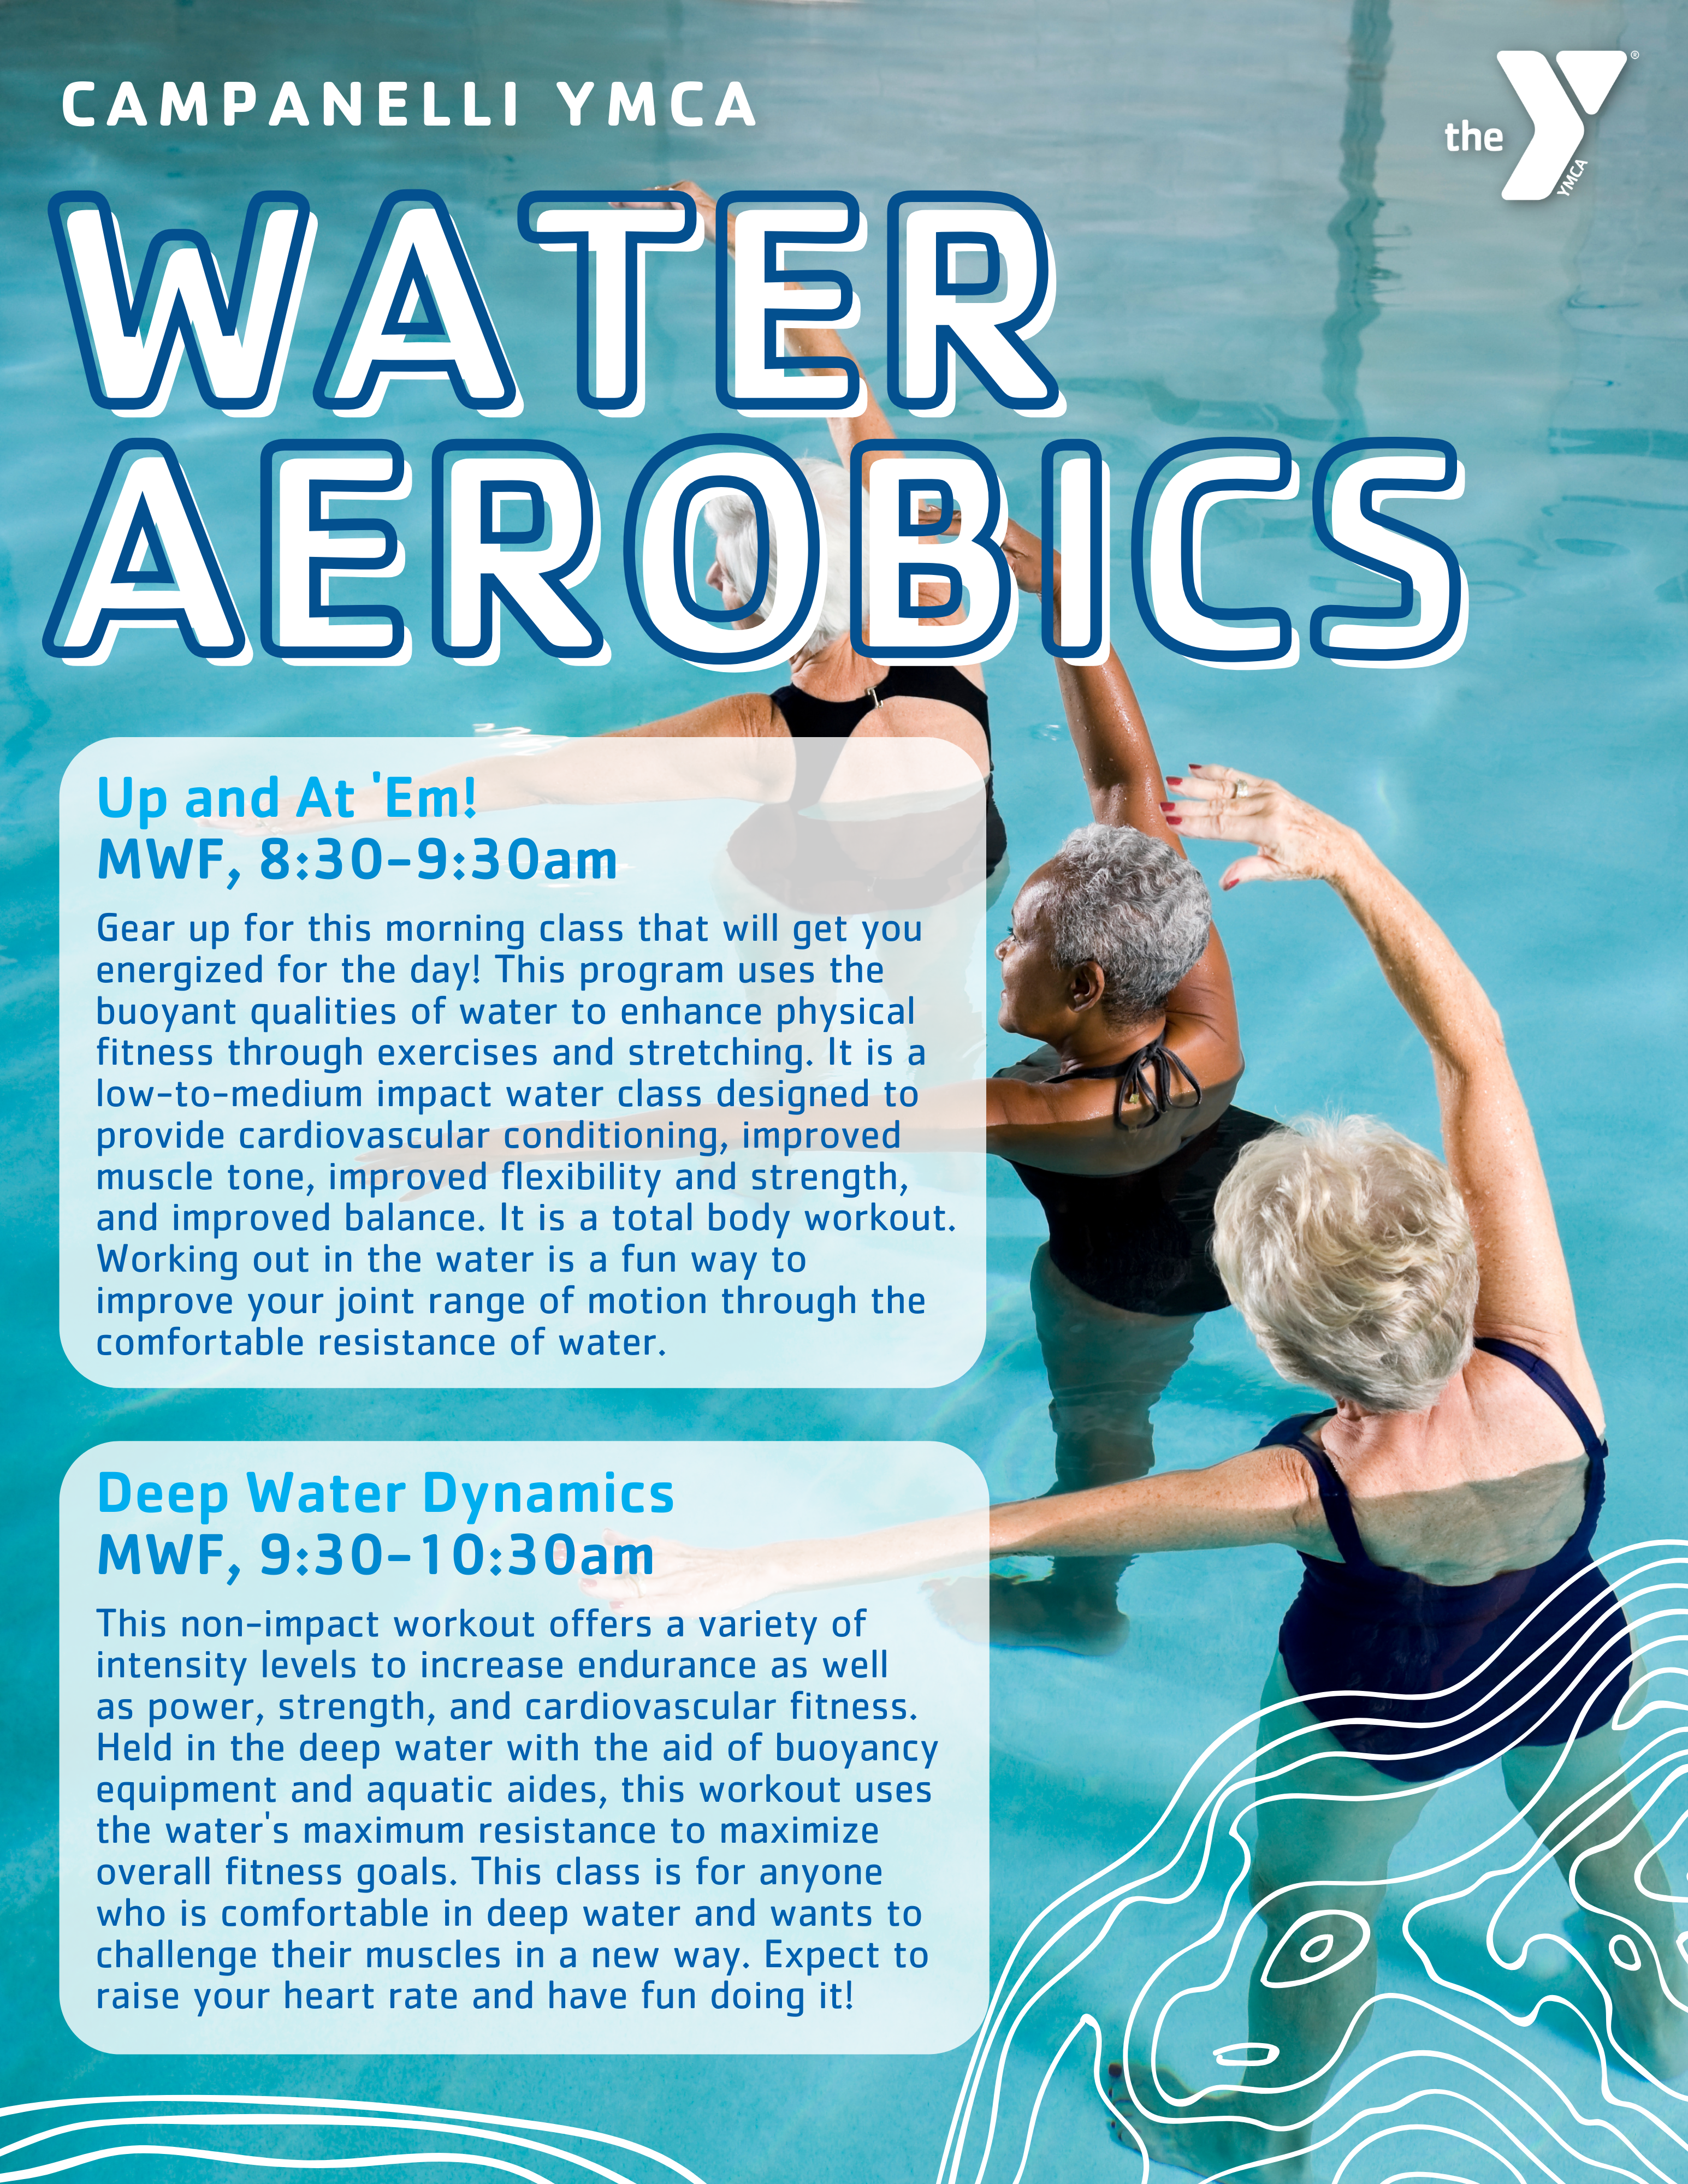 Instructive Essentials for What to Wear to Water Aerobics